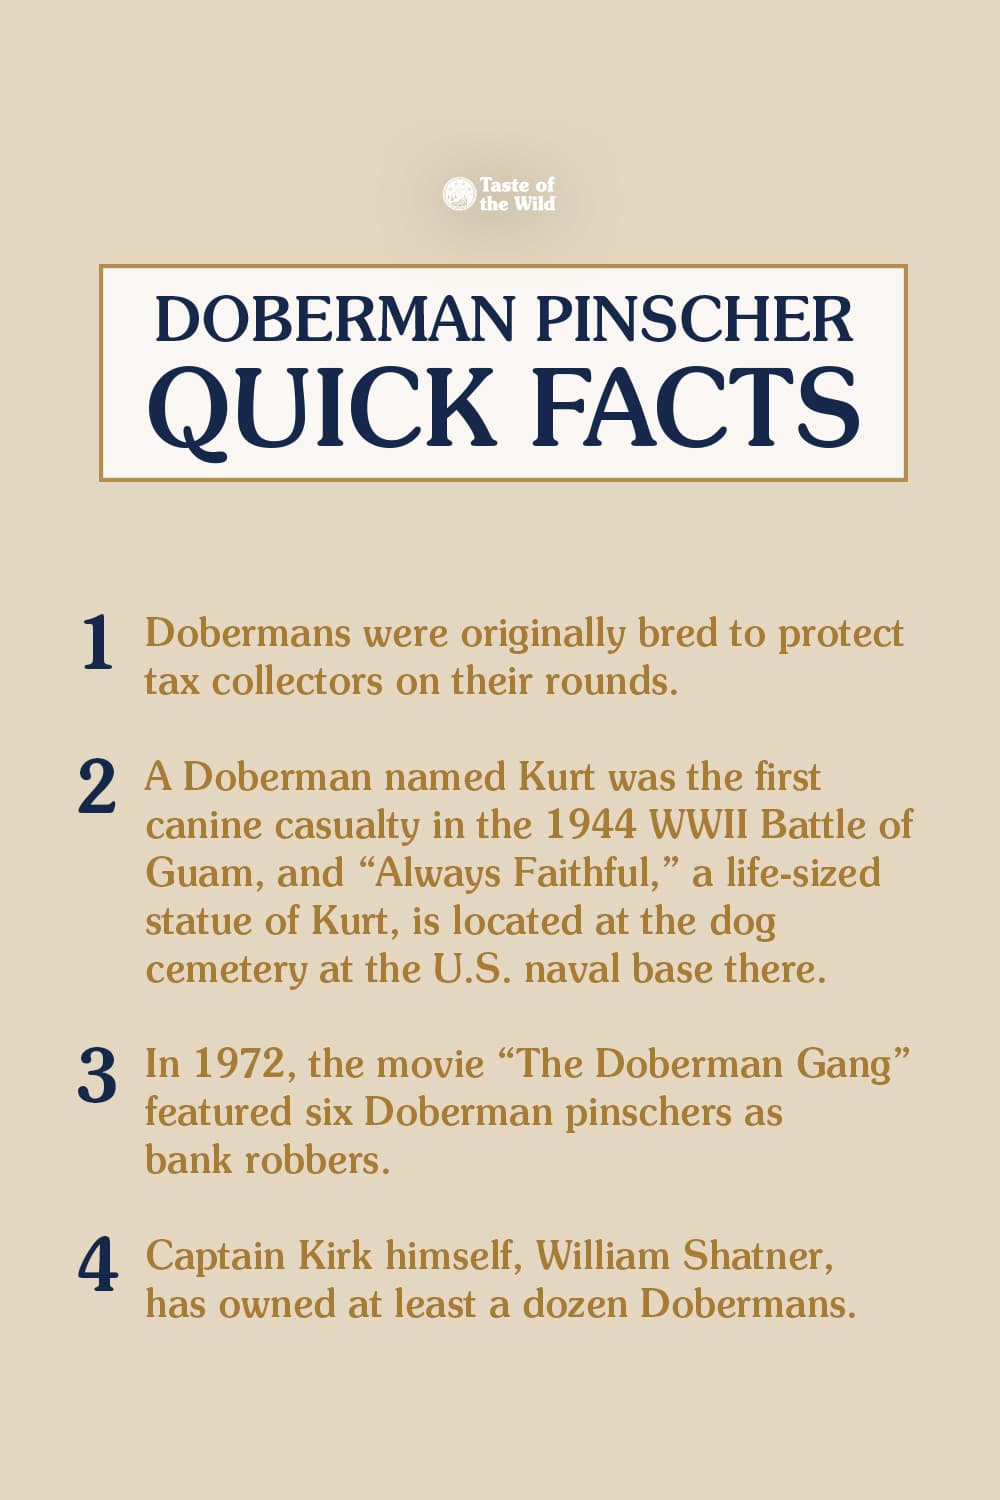 Fun Facts About Doberman Pinschers Infographic | Taste of the Wild